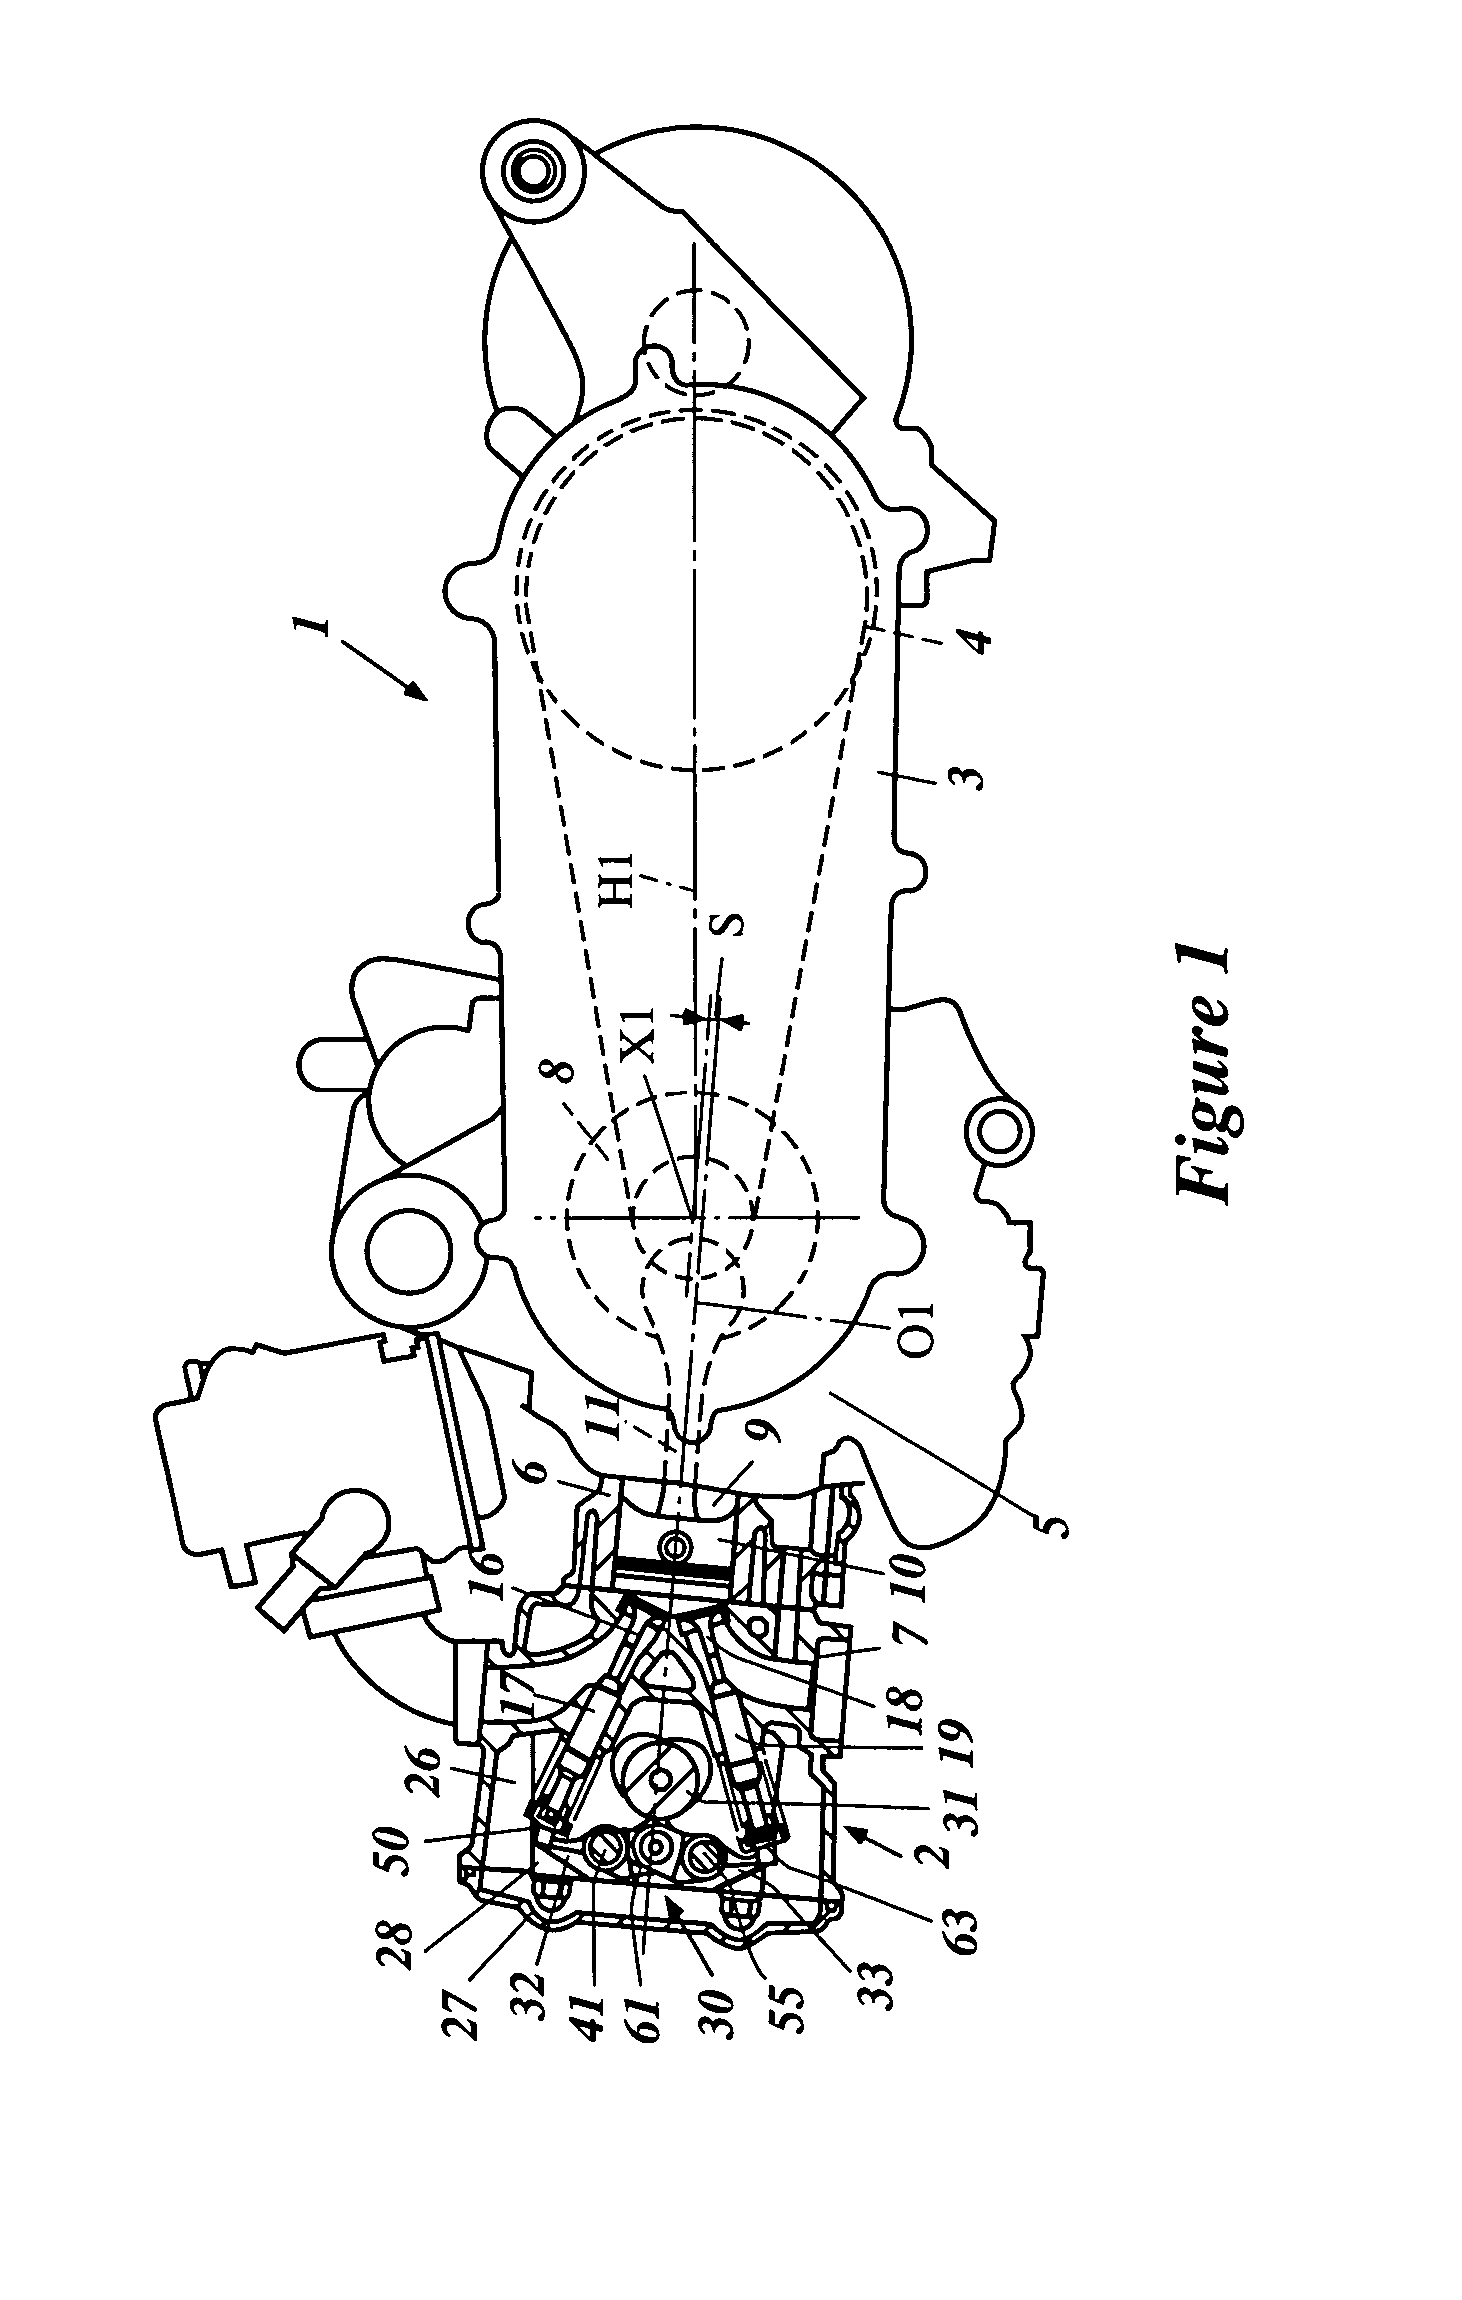 Valve drive system for four-stroke engine